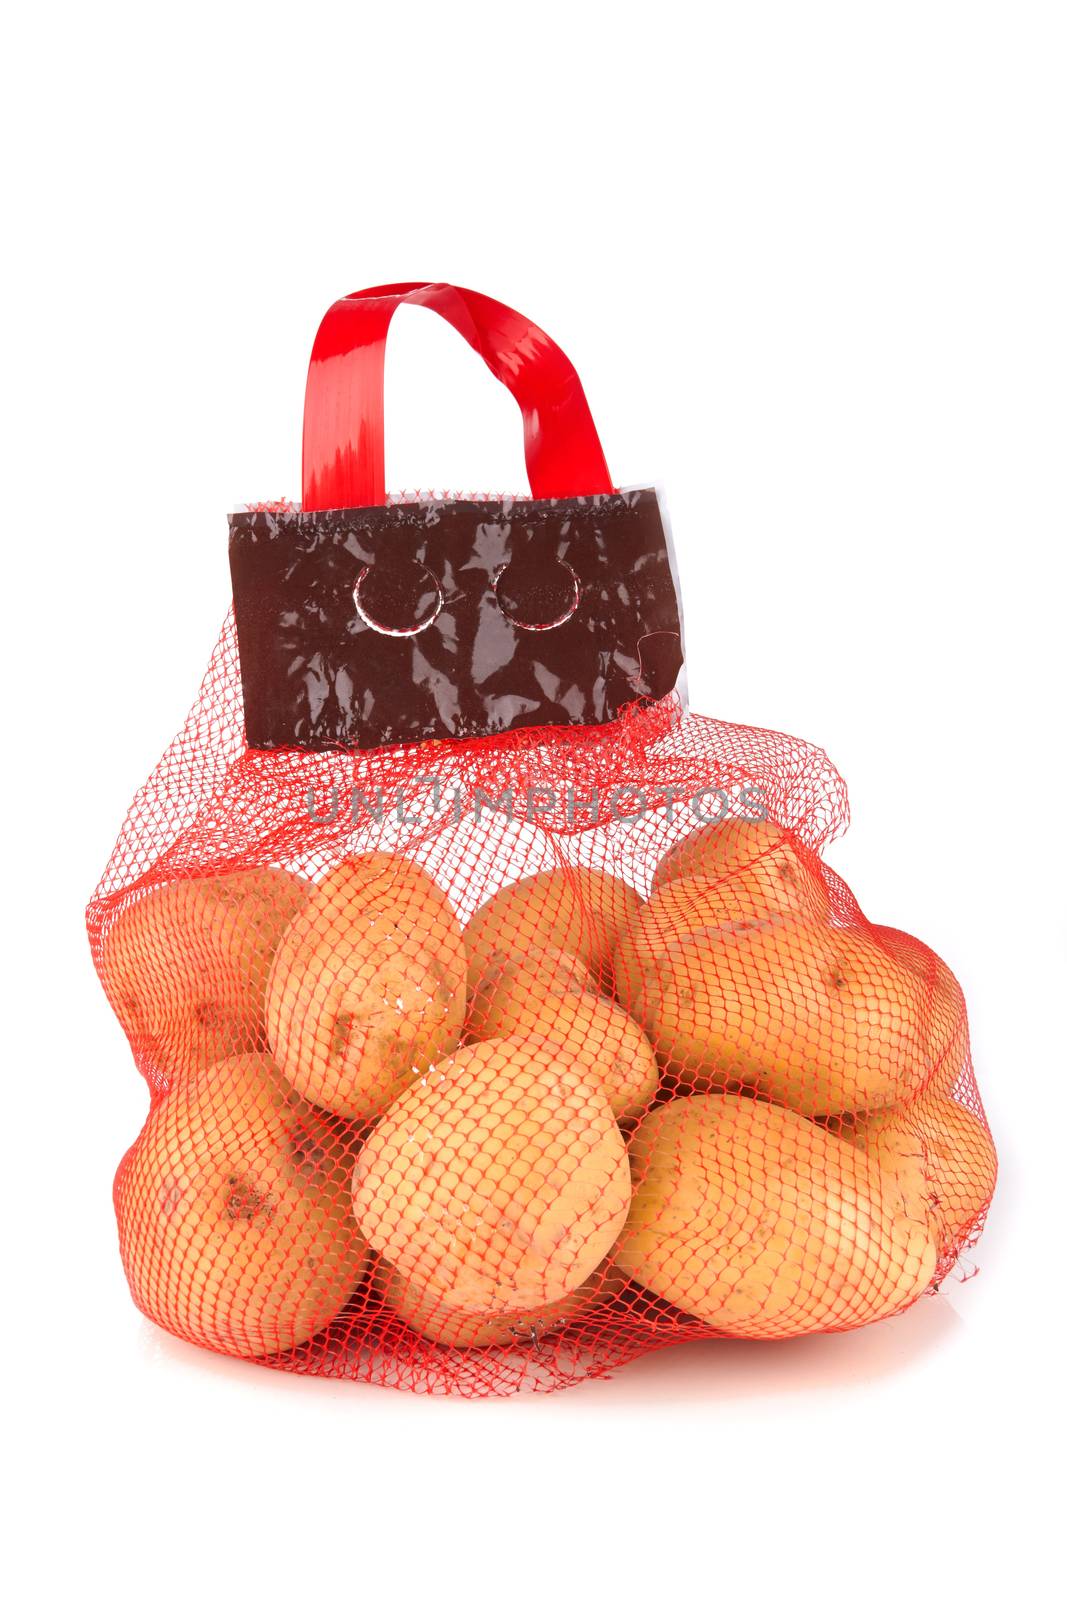 bag with potato by pioneer111